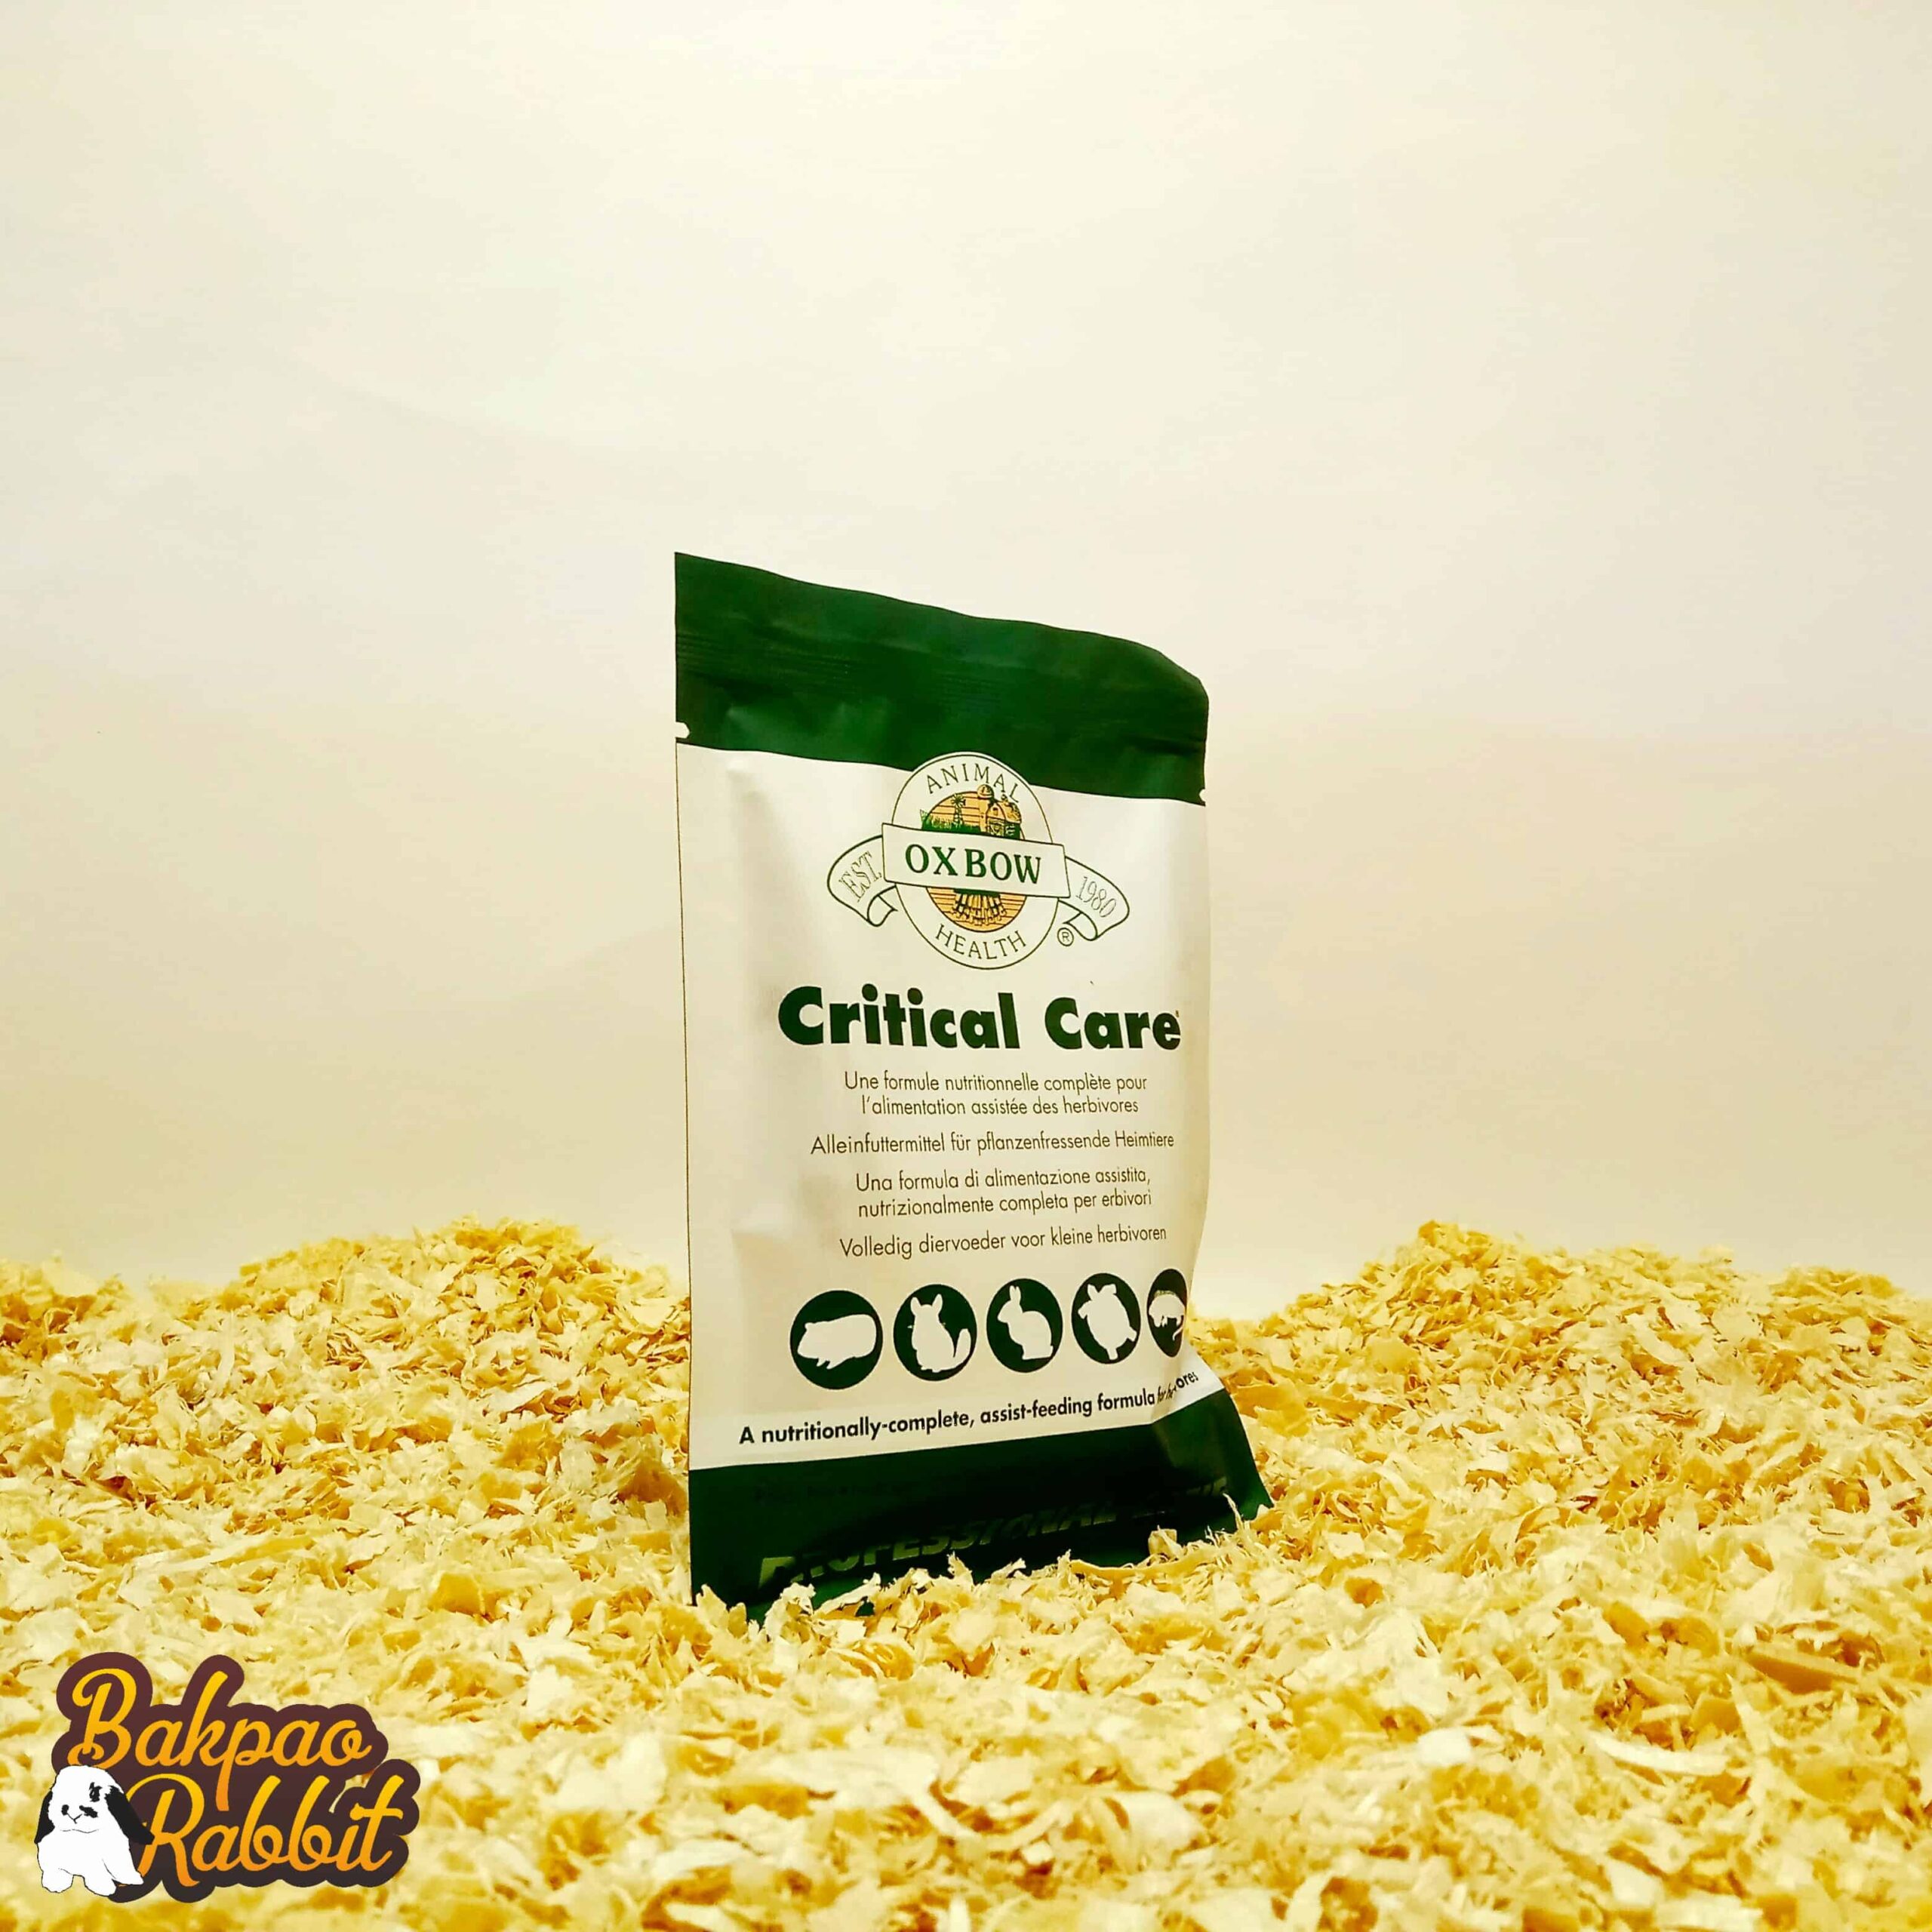 Oxbow Professional Line Critical Care 36g